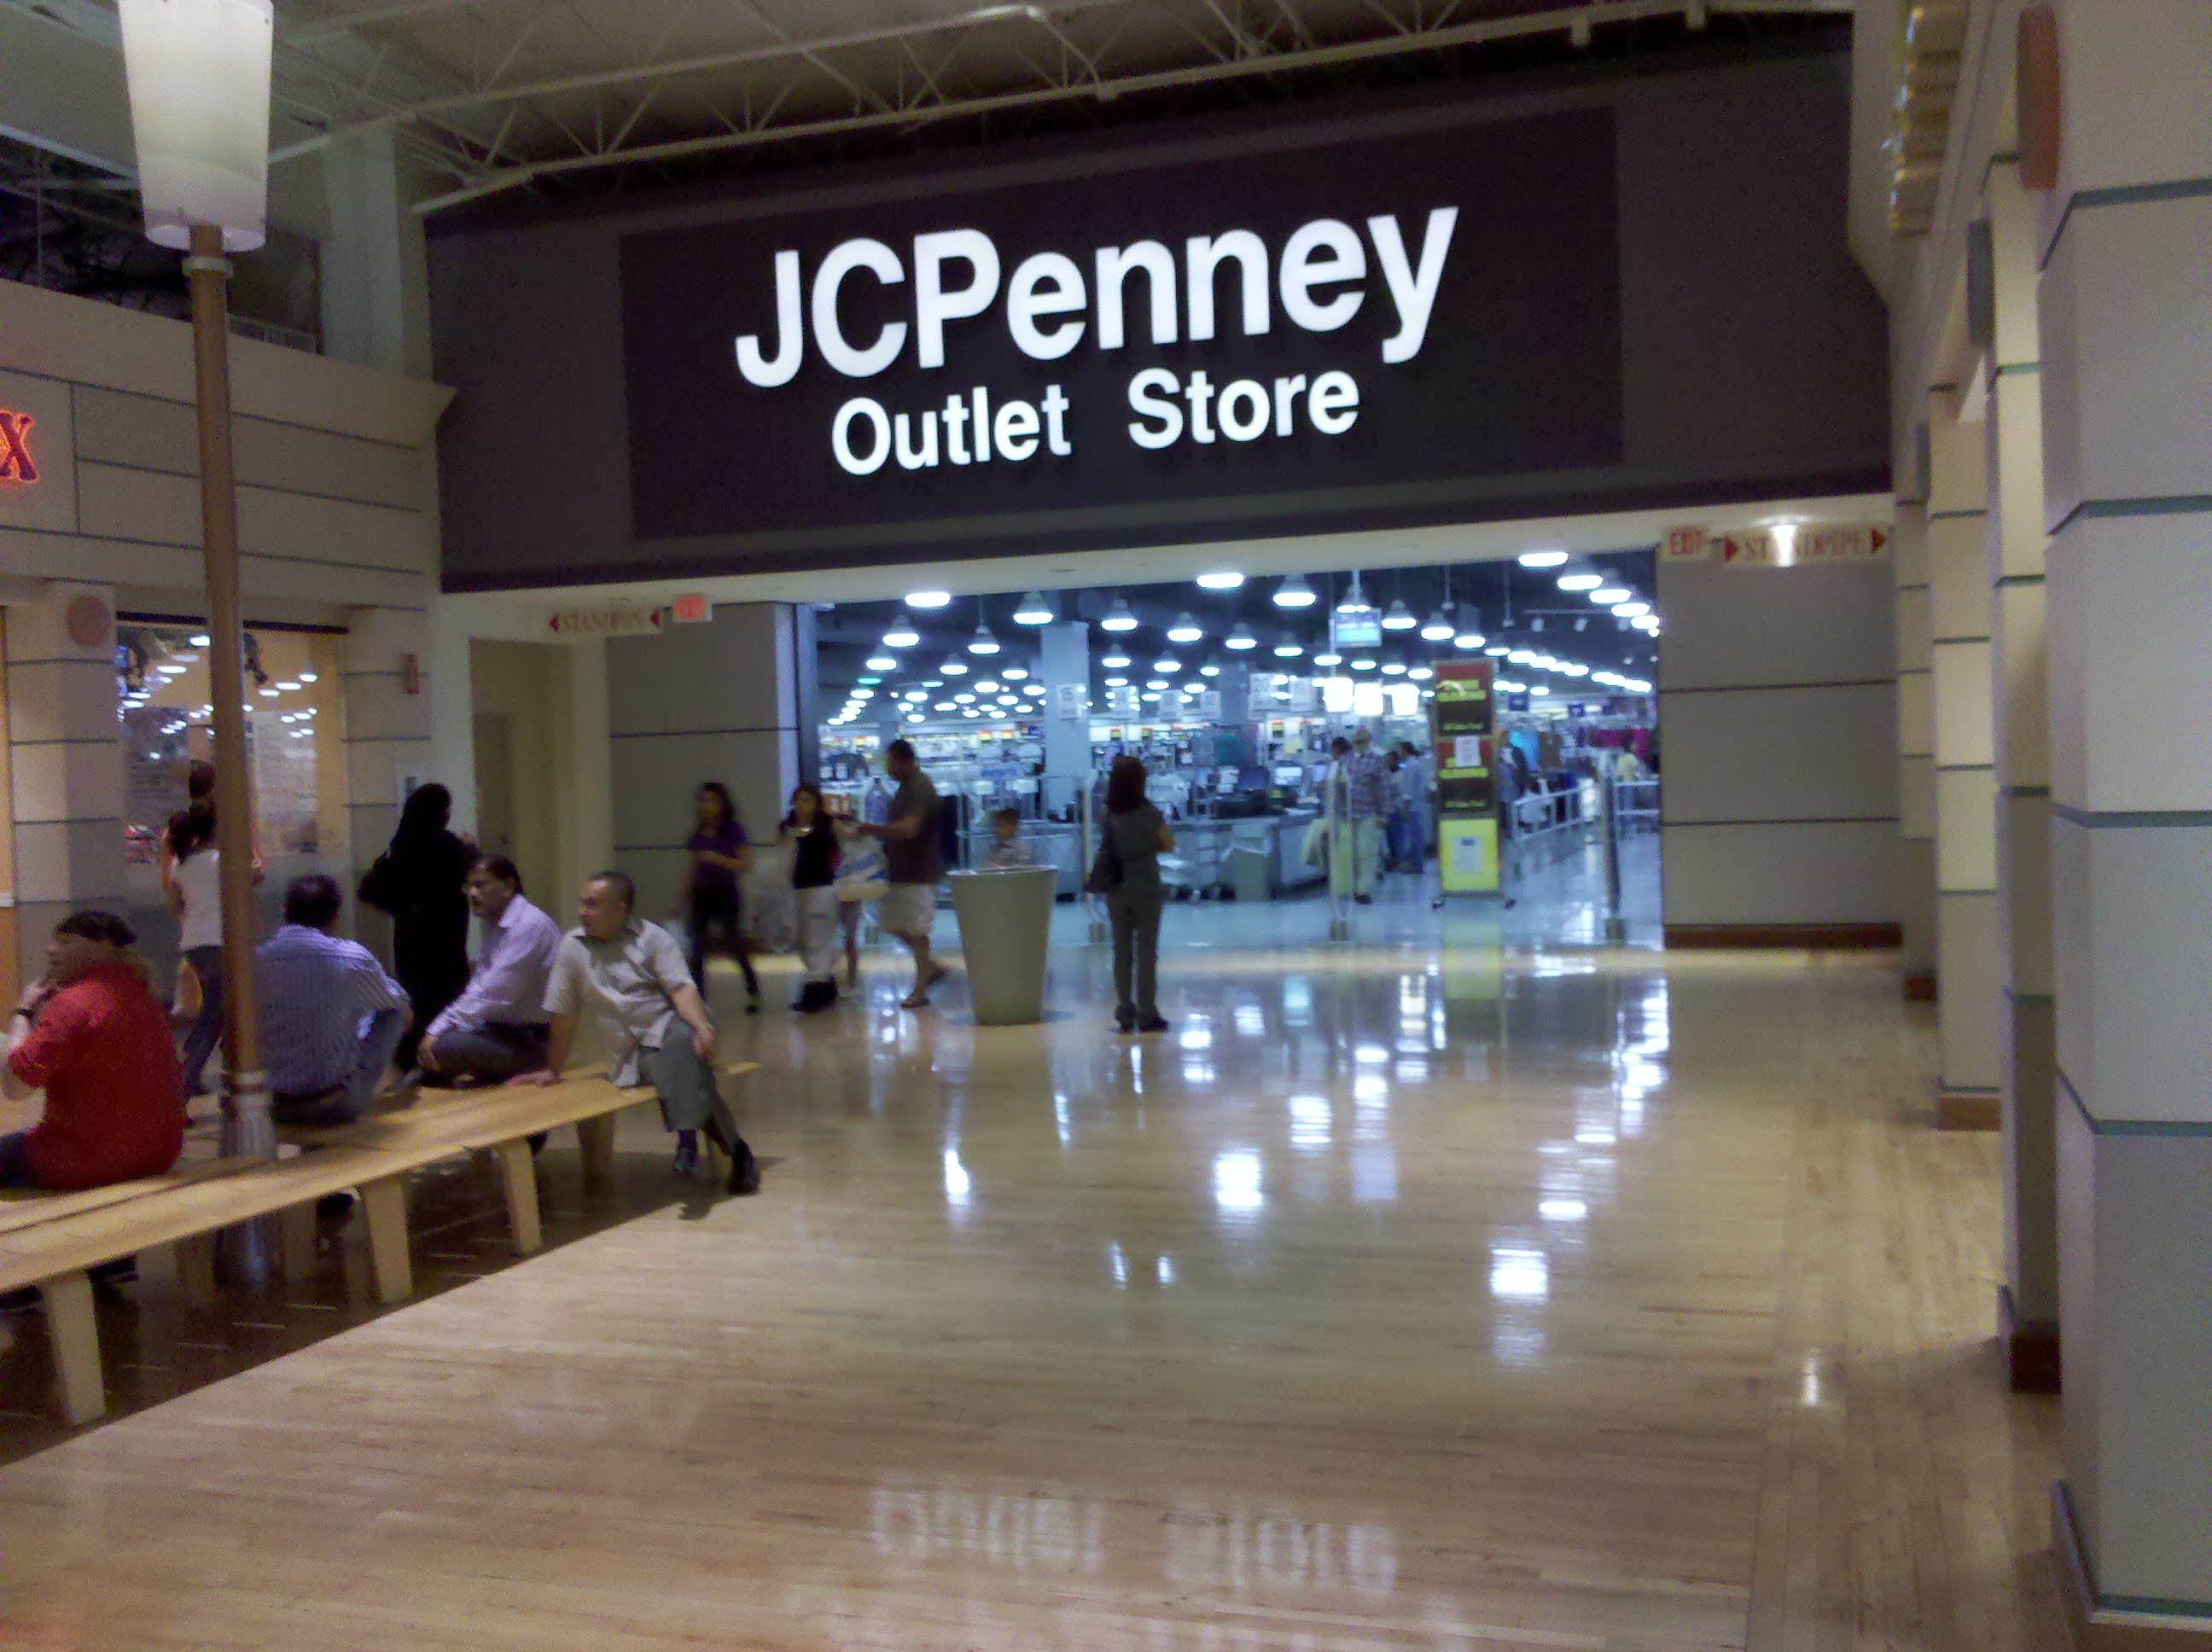 Signage on the JCPenney Outlet store